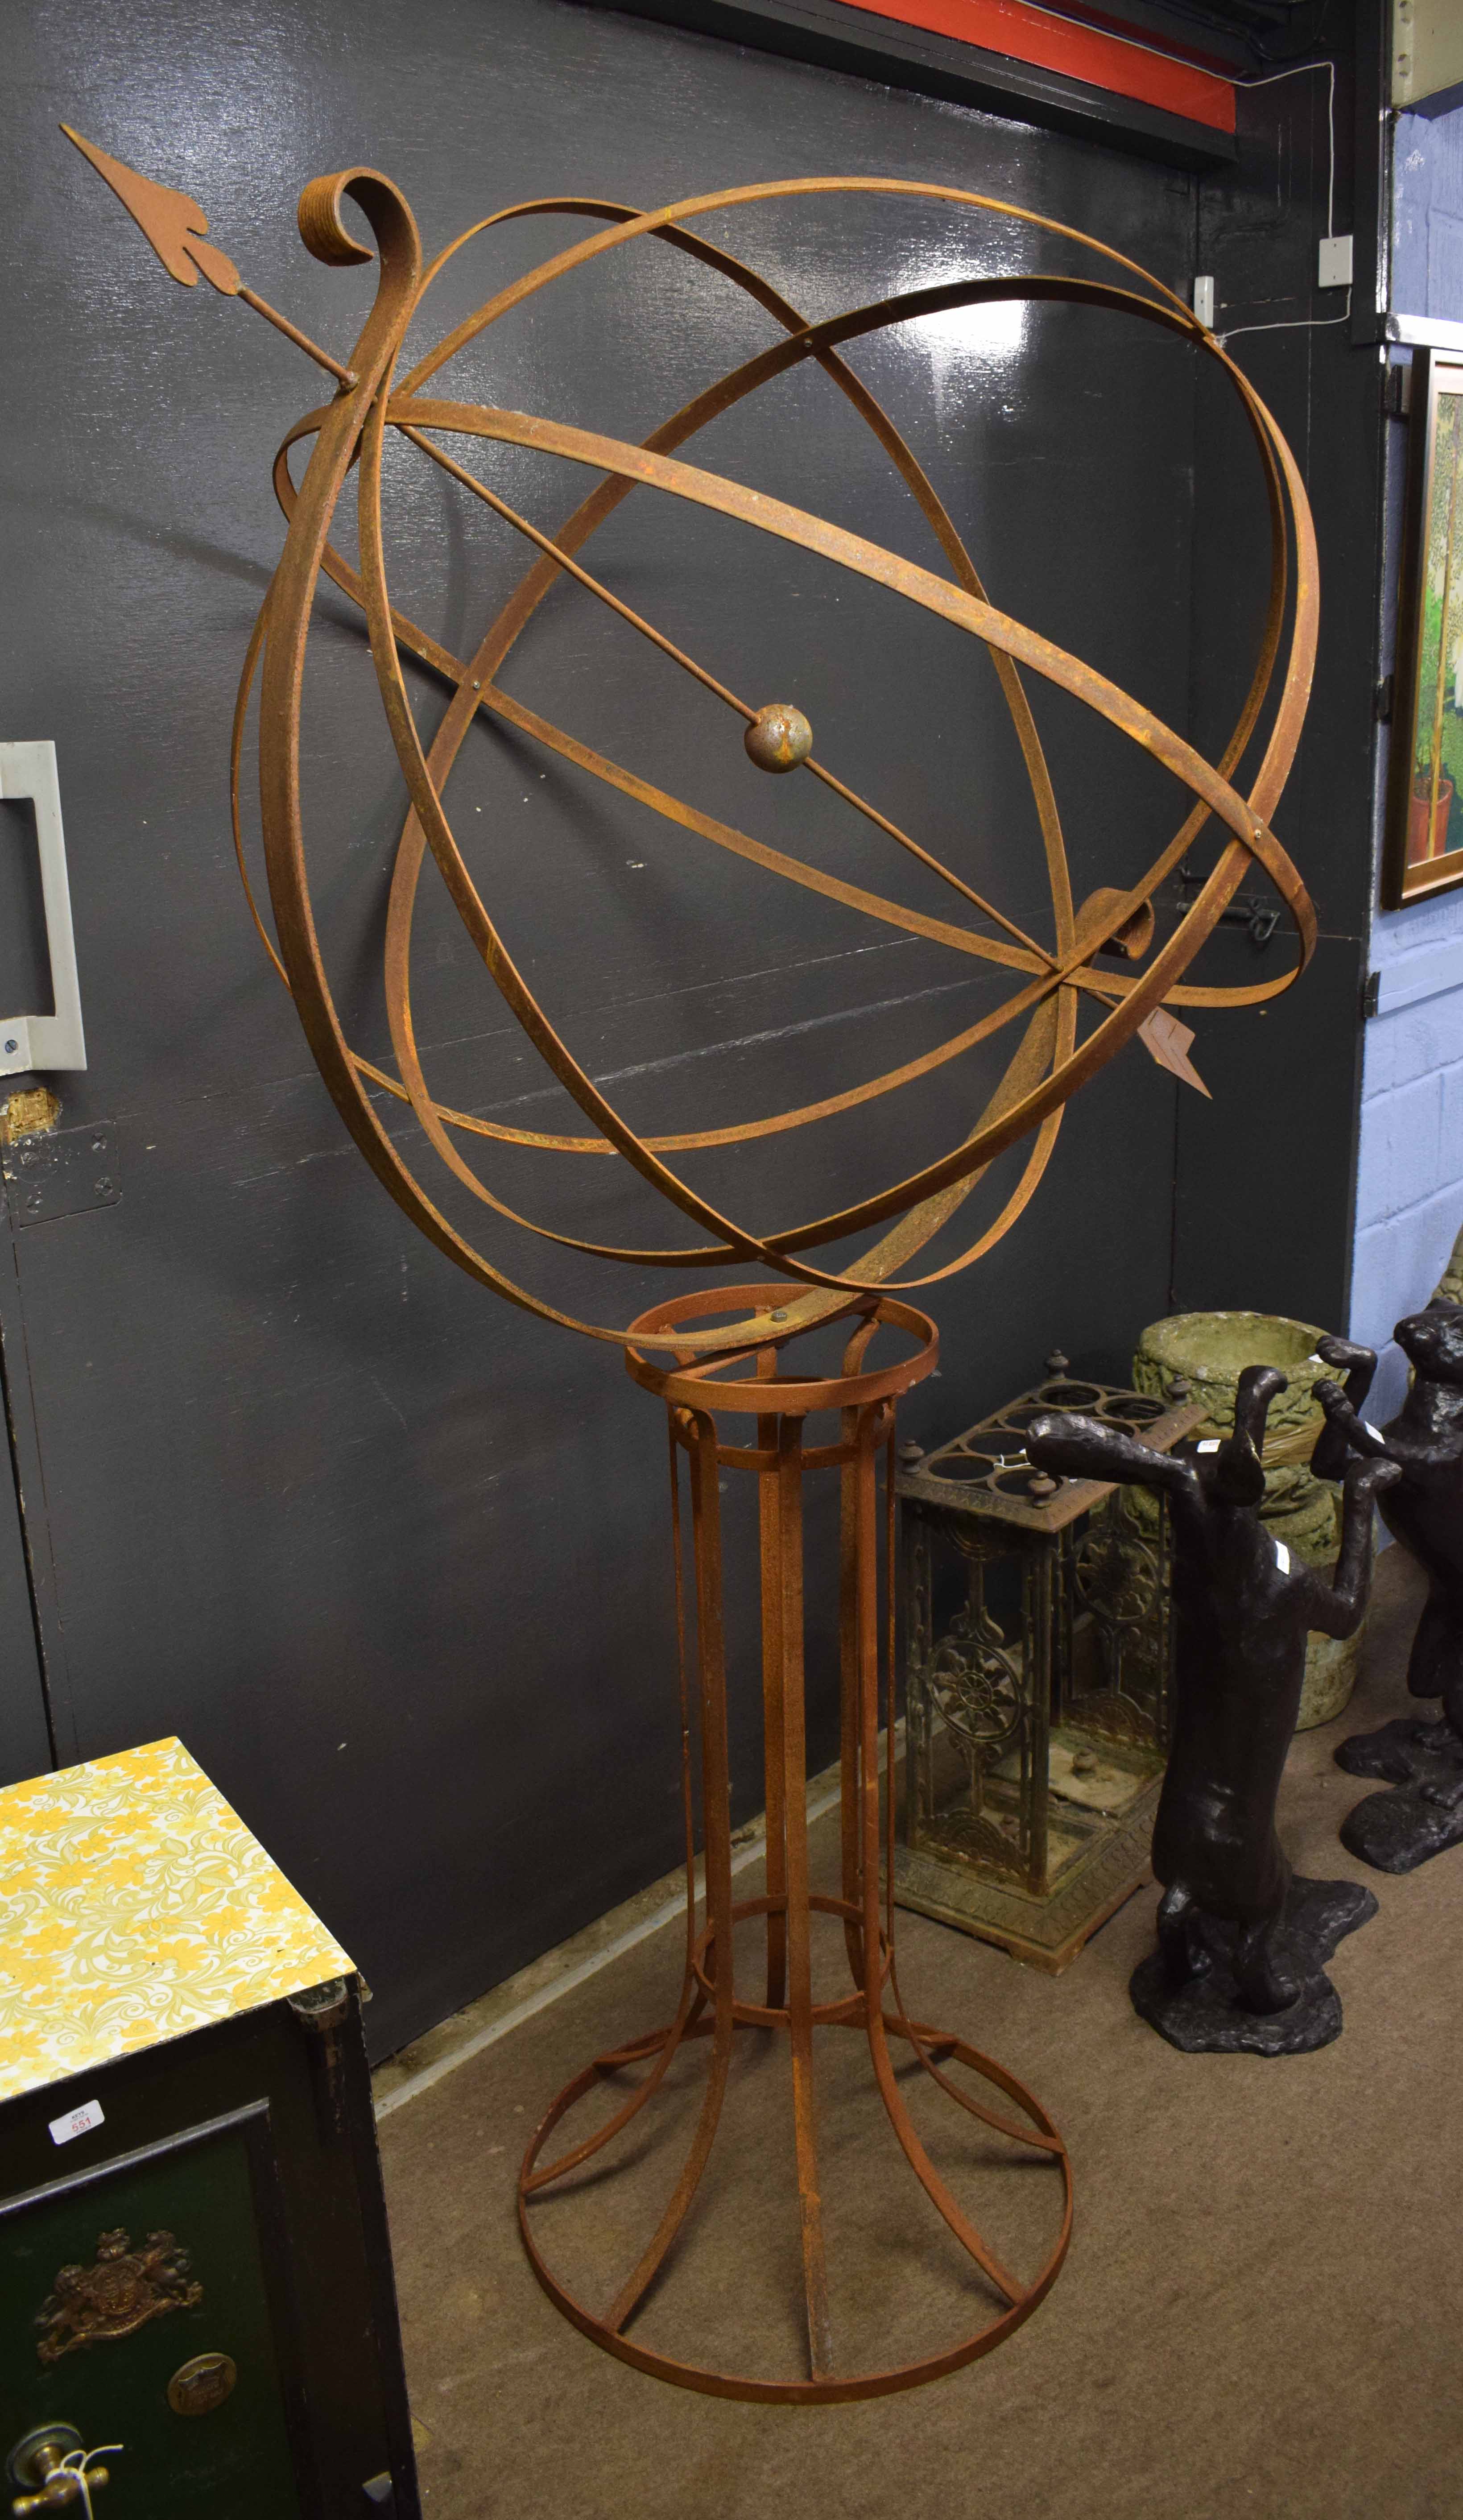 Unusual weathered and rusted metal weathervane, globe form with arrow pointer, raised on spreading